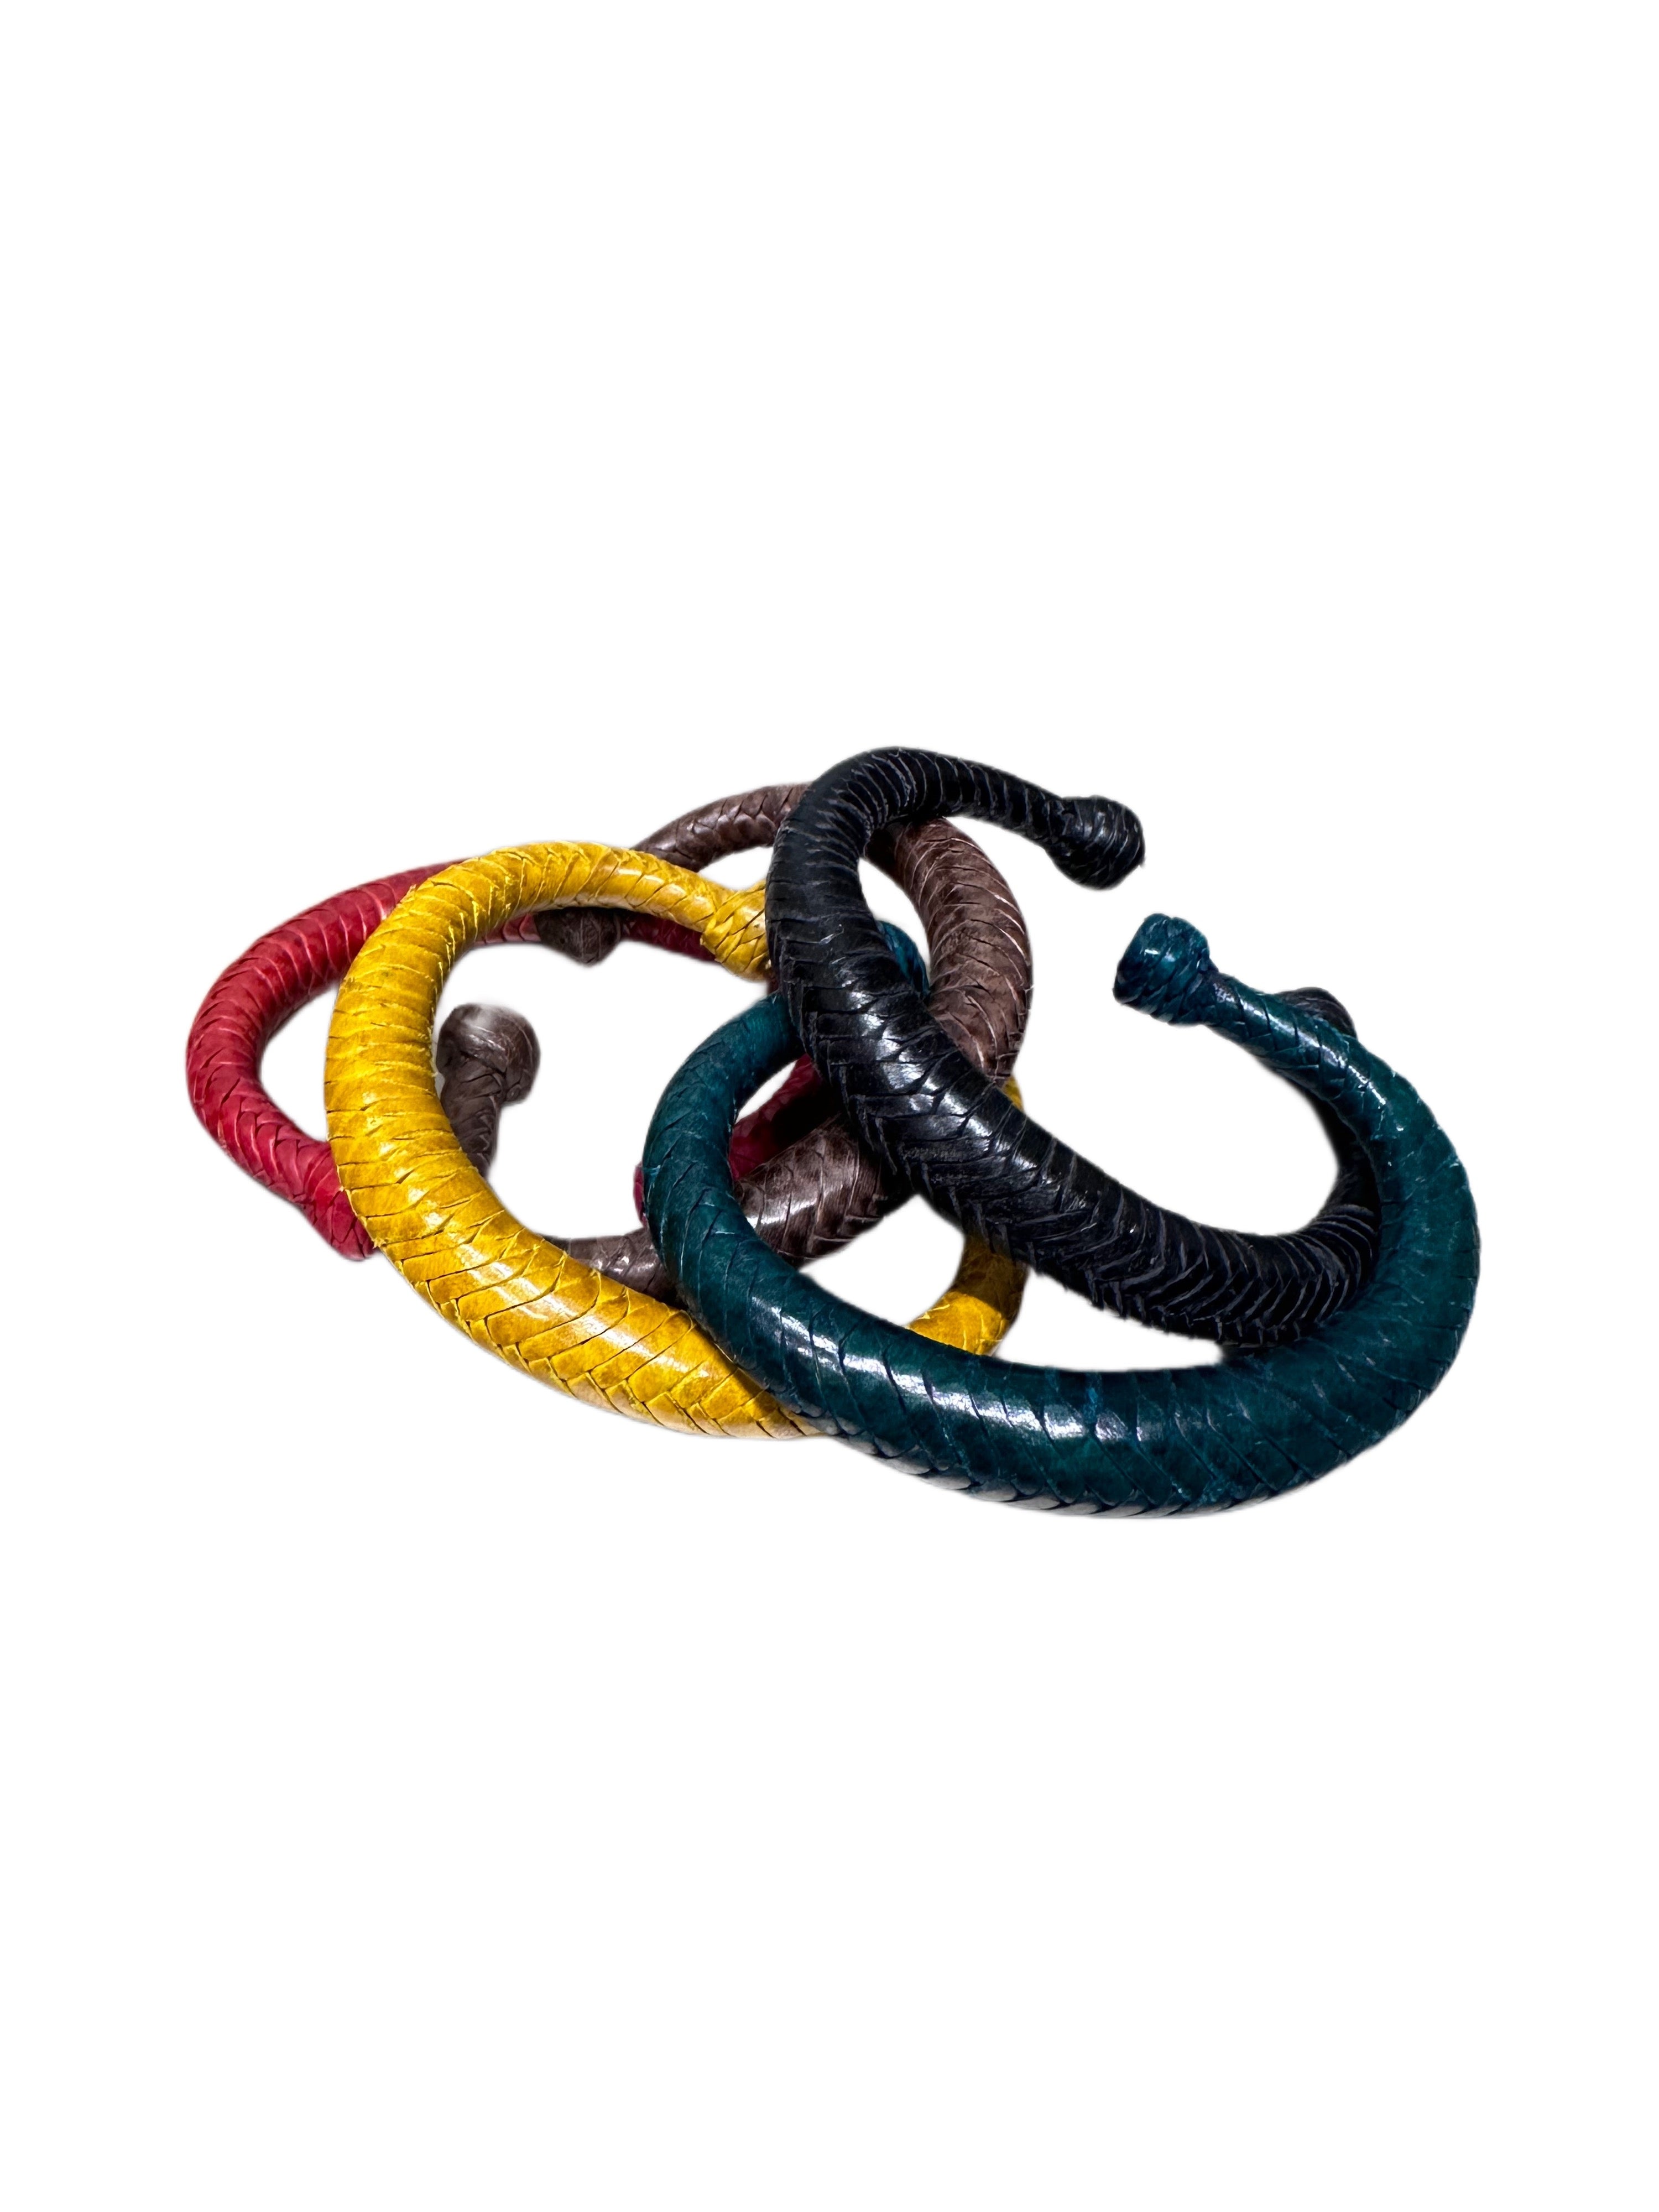 Handmade Woven Colored Leather Bracelets